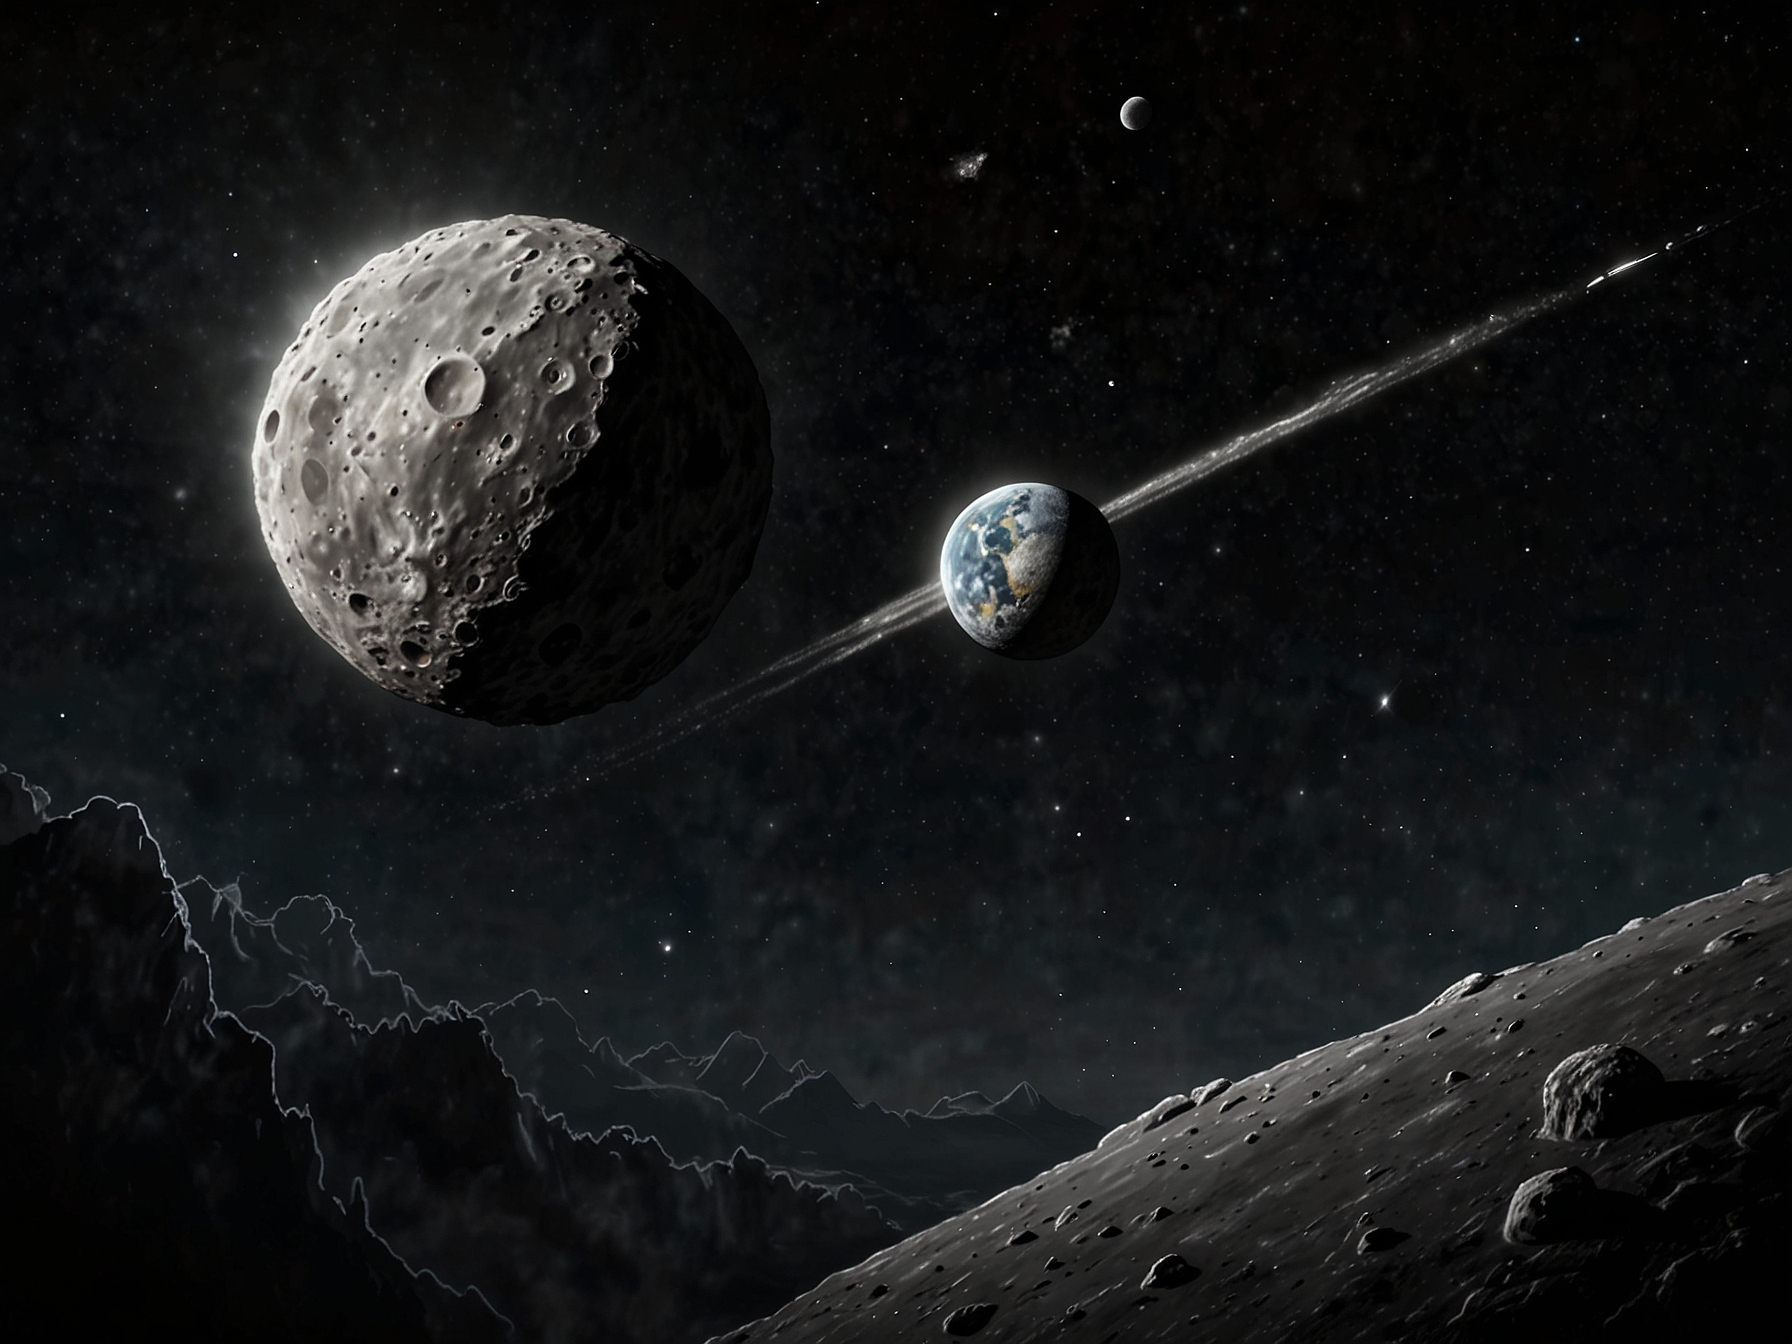 An illustration of the asteroid 2024 MK, showing its path relative to Earth and the moon, emphasizing the safe distance at which it will pass by and the excitement surrounding this rare event.